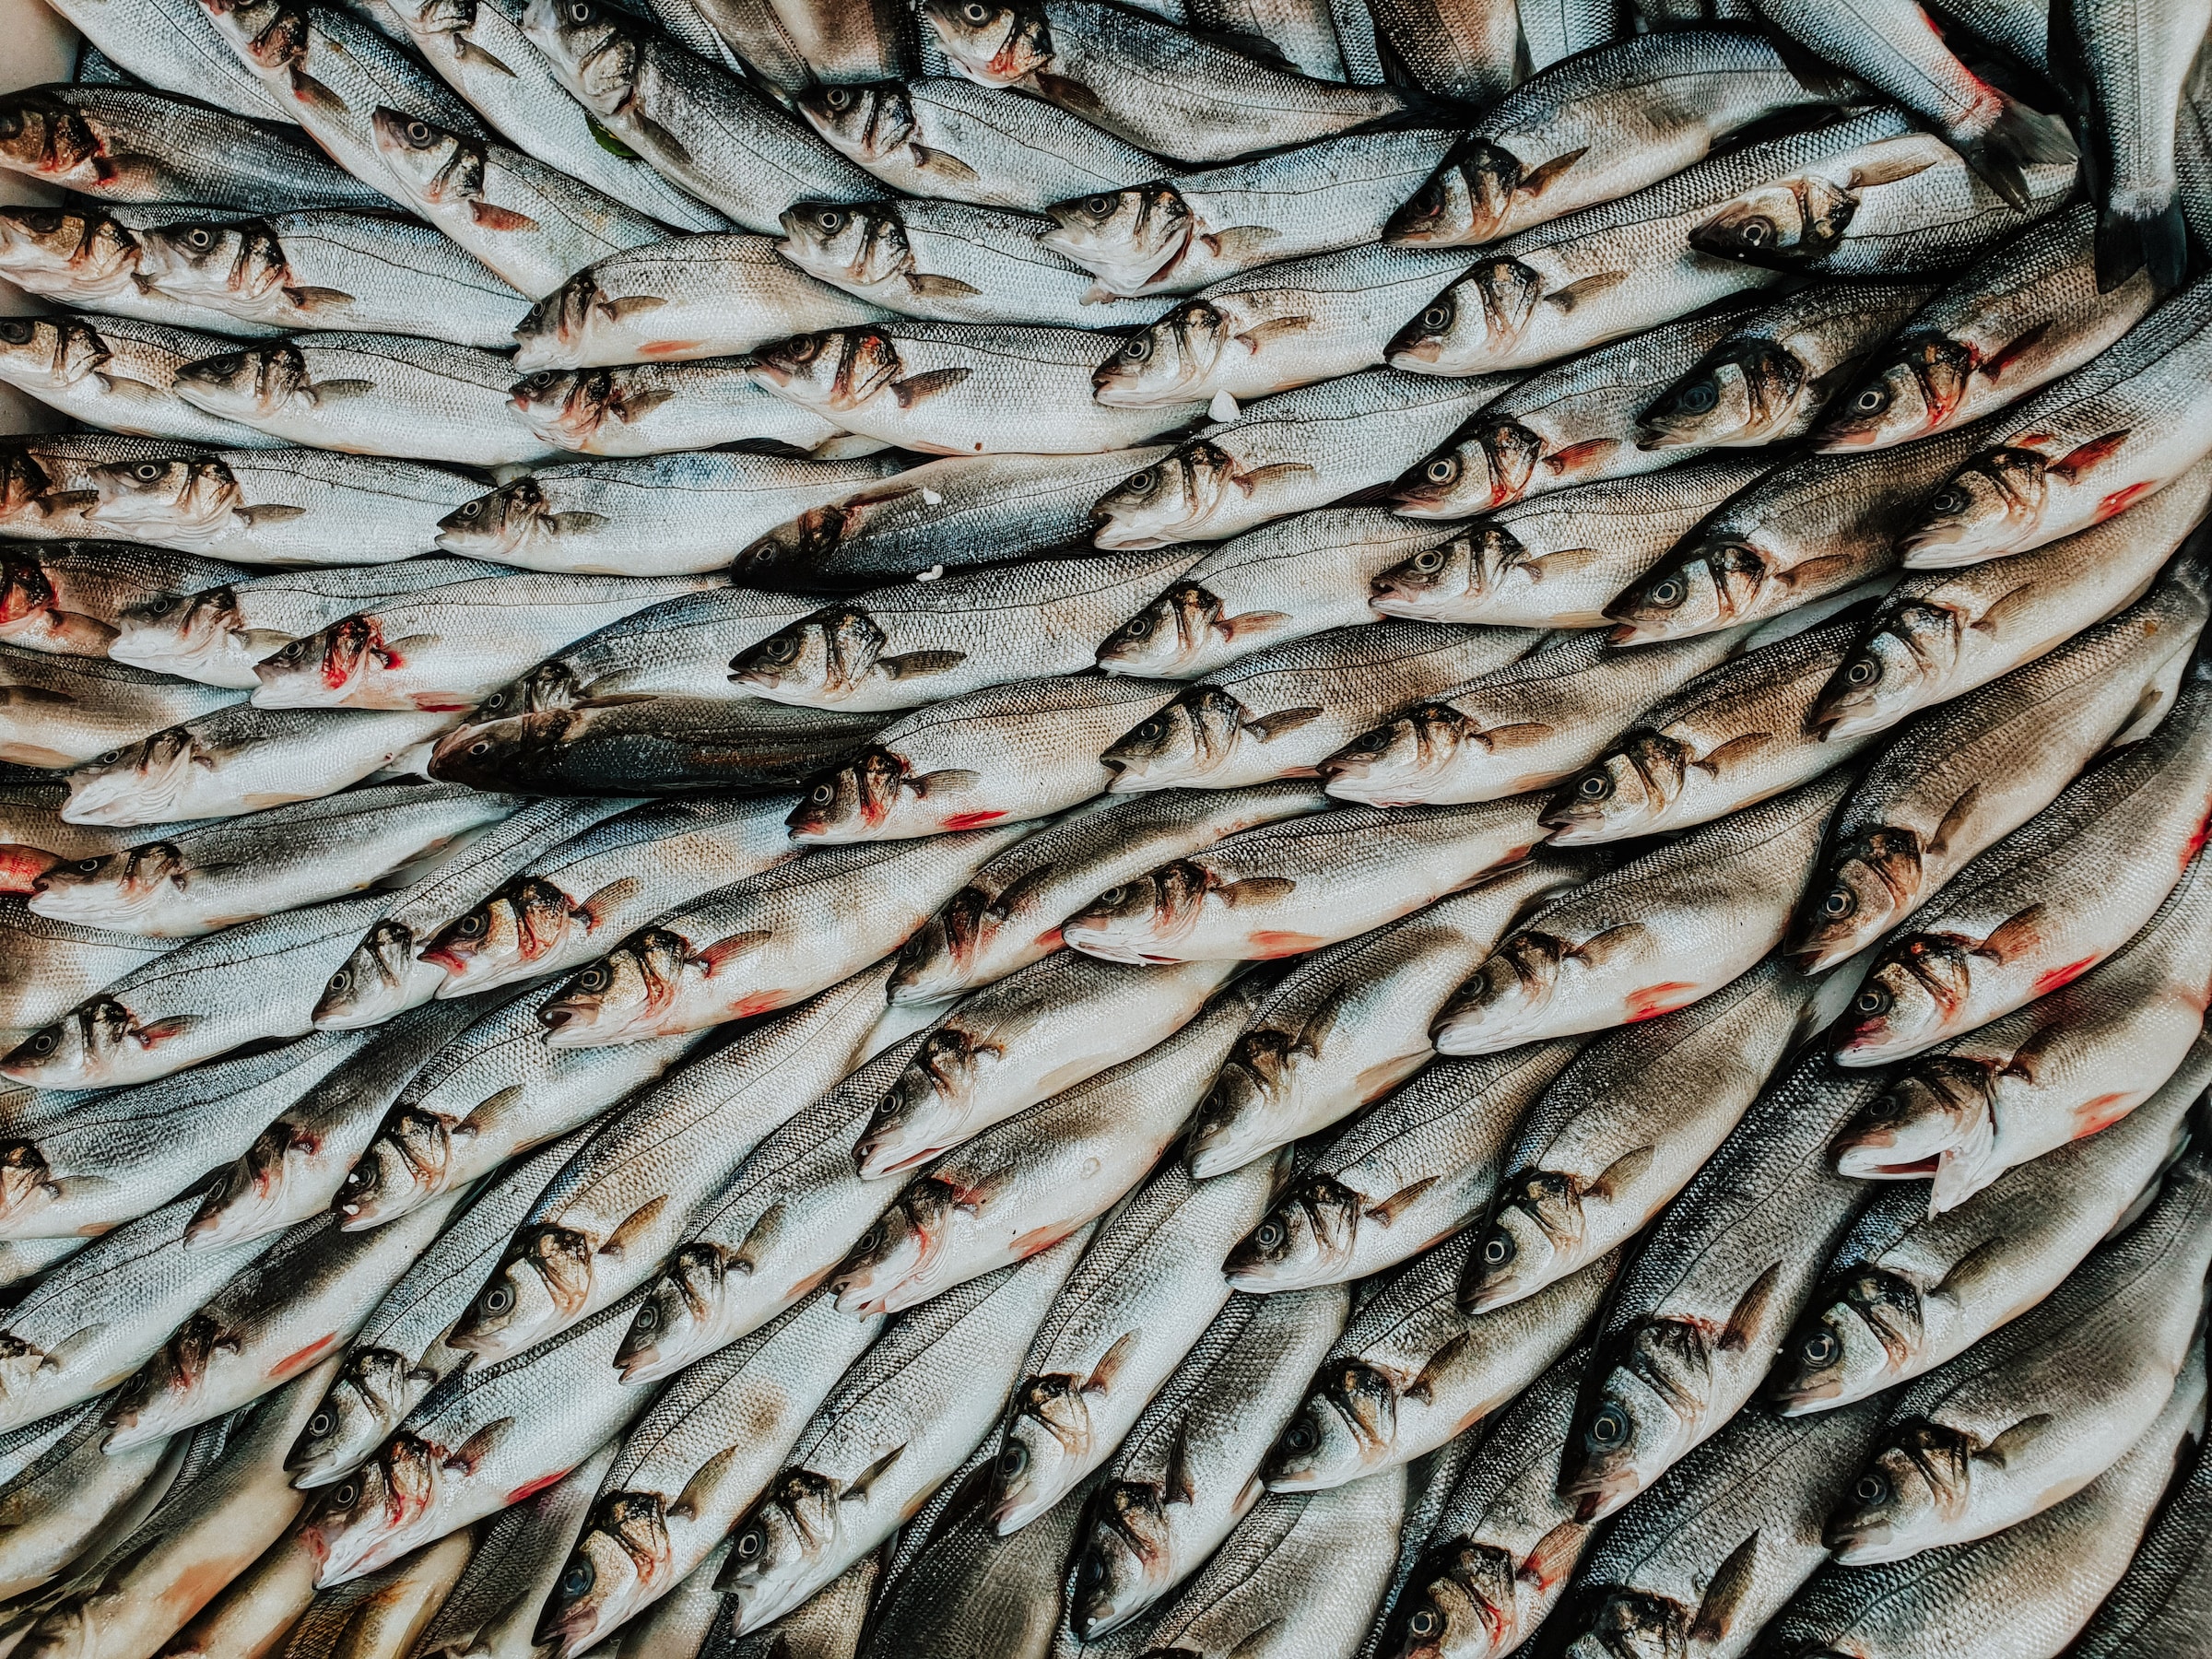 Overfishing: The most serious threat to our oceans